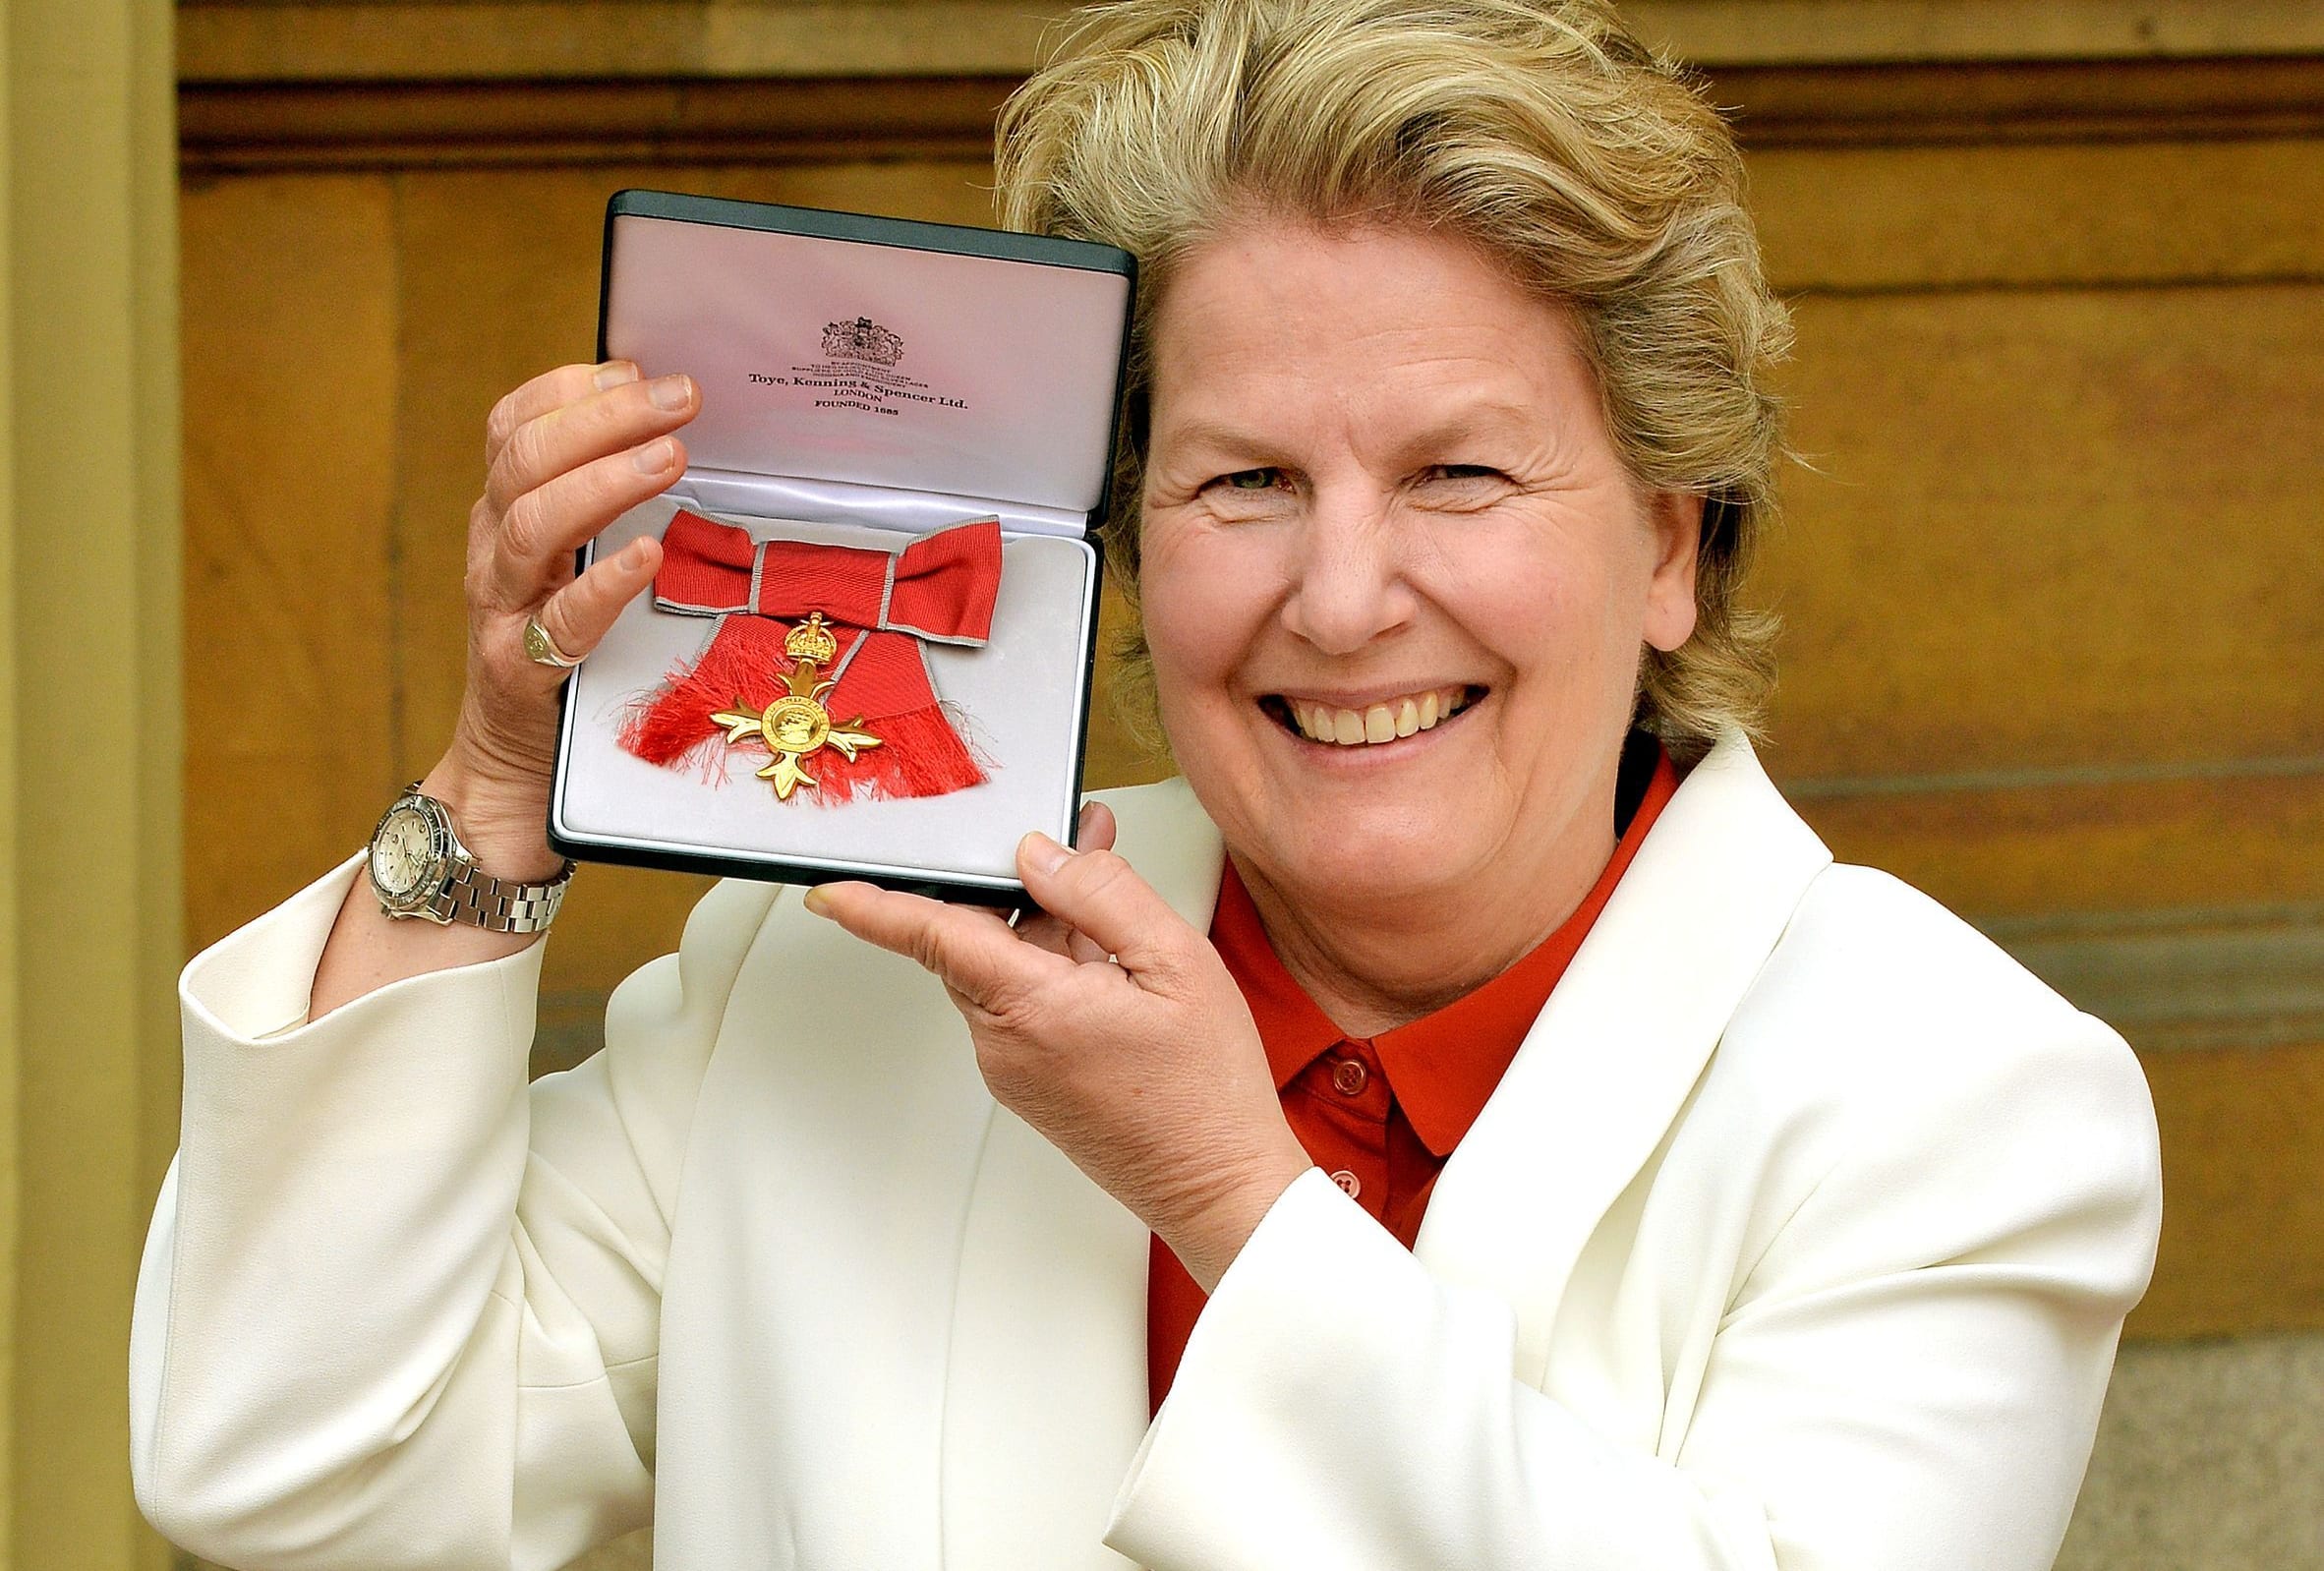 Sandi Toksvig was awarded an OBE (Order of the British Empire) in April 2014.